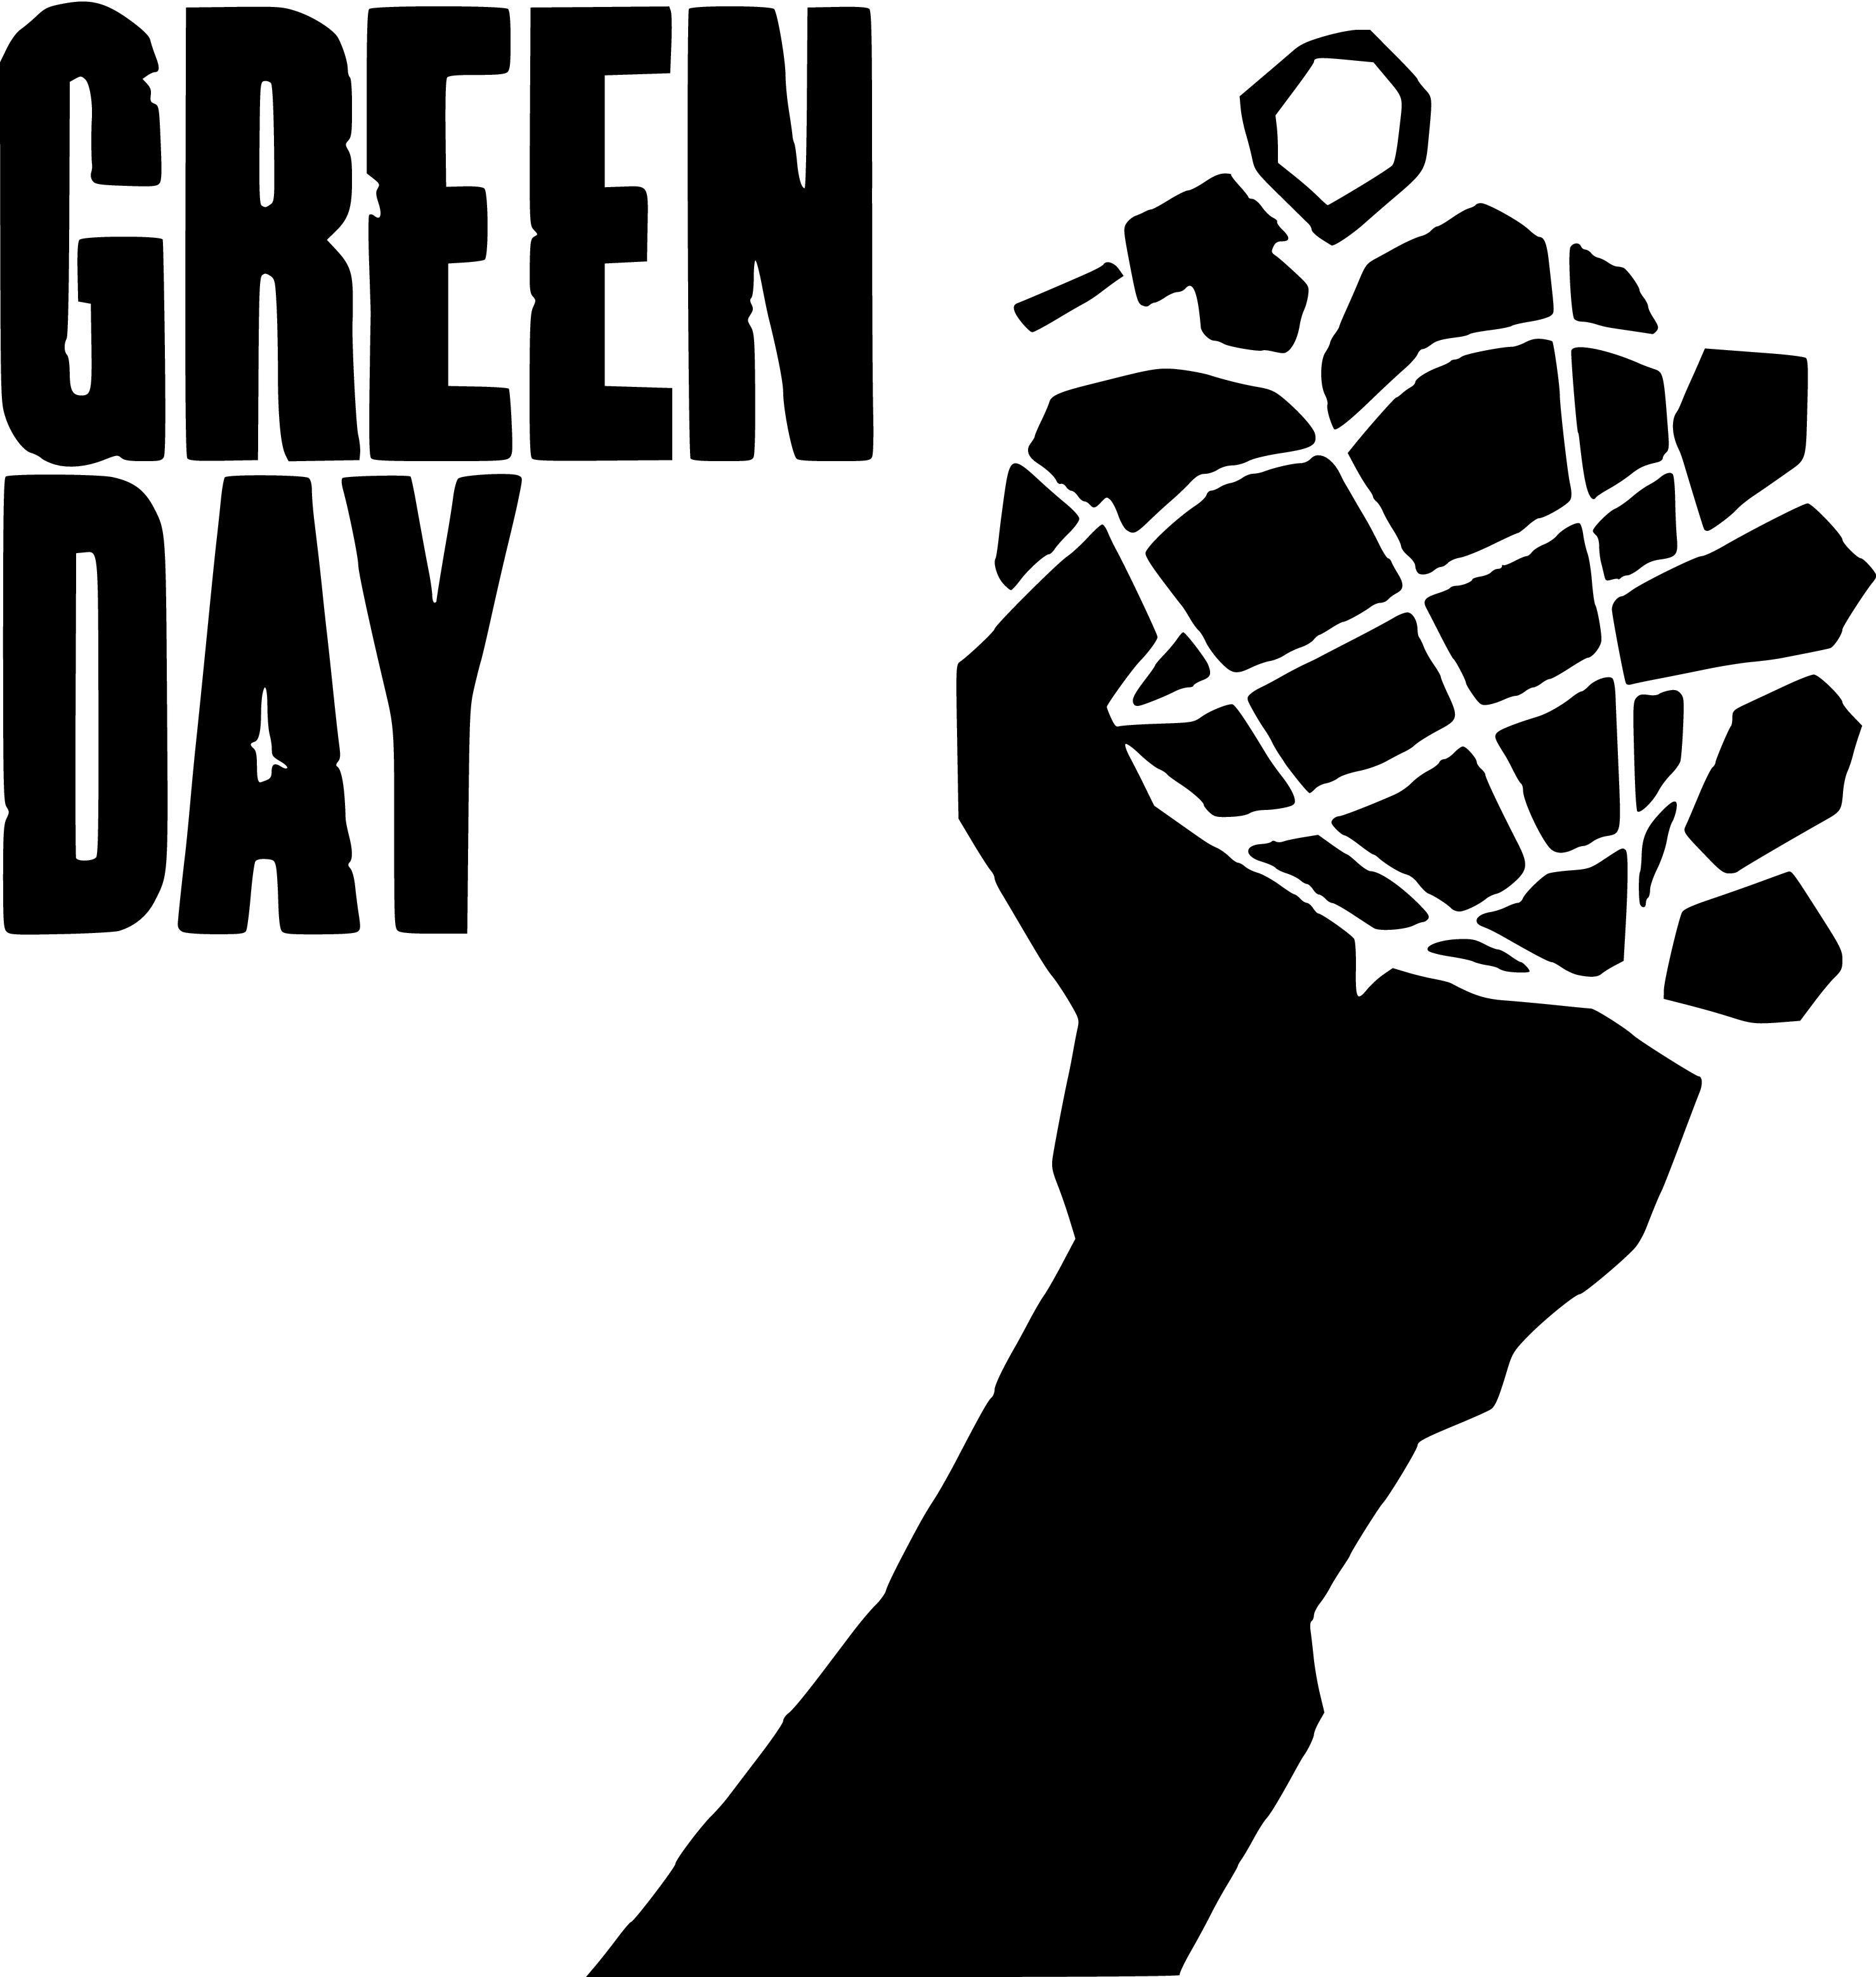 Green Day Black and White Logo - Green Day Rock Band Vinyl Decal Sticker Style 1